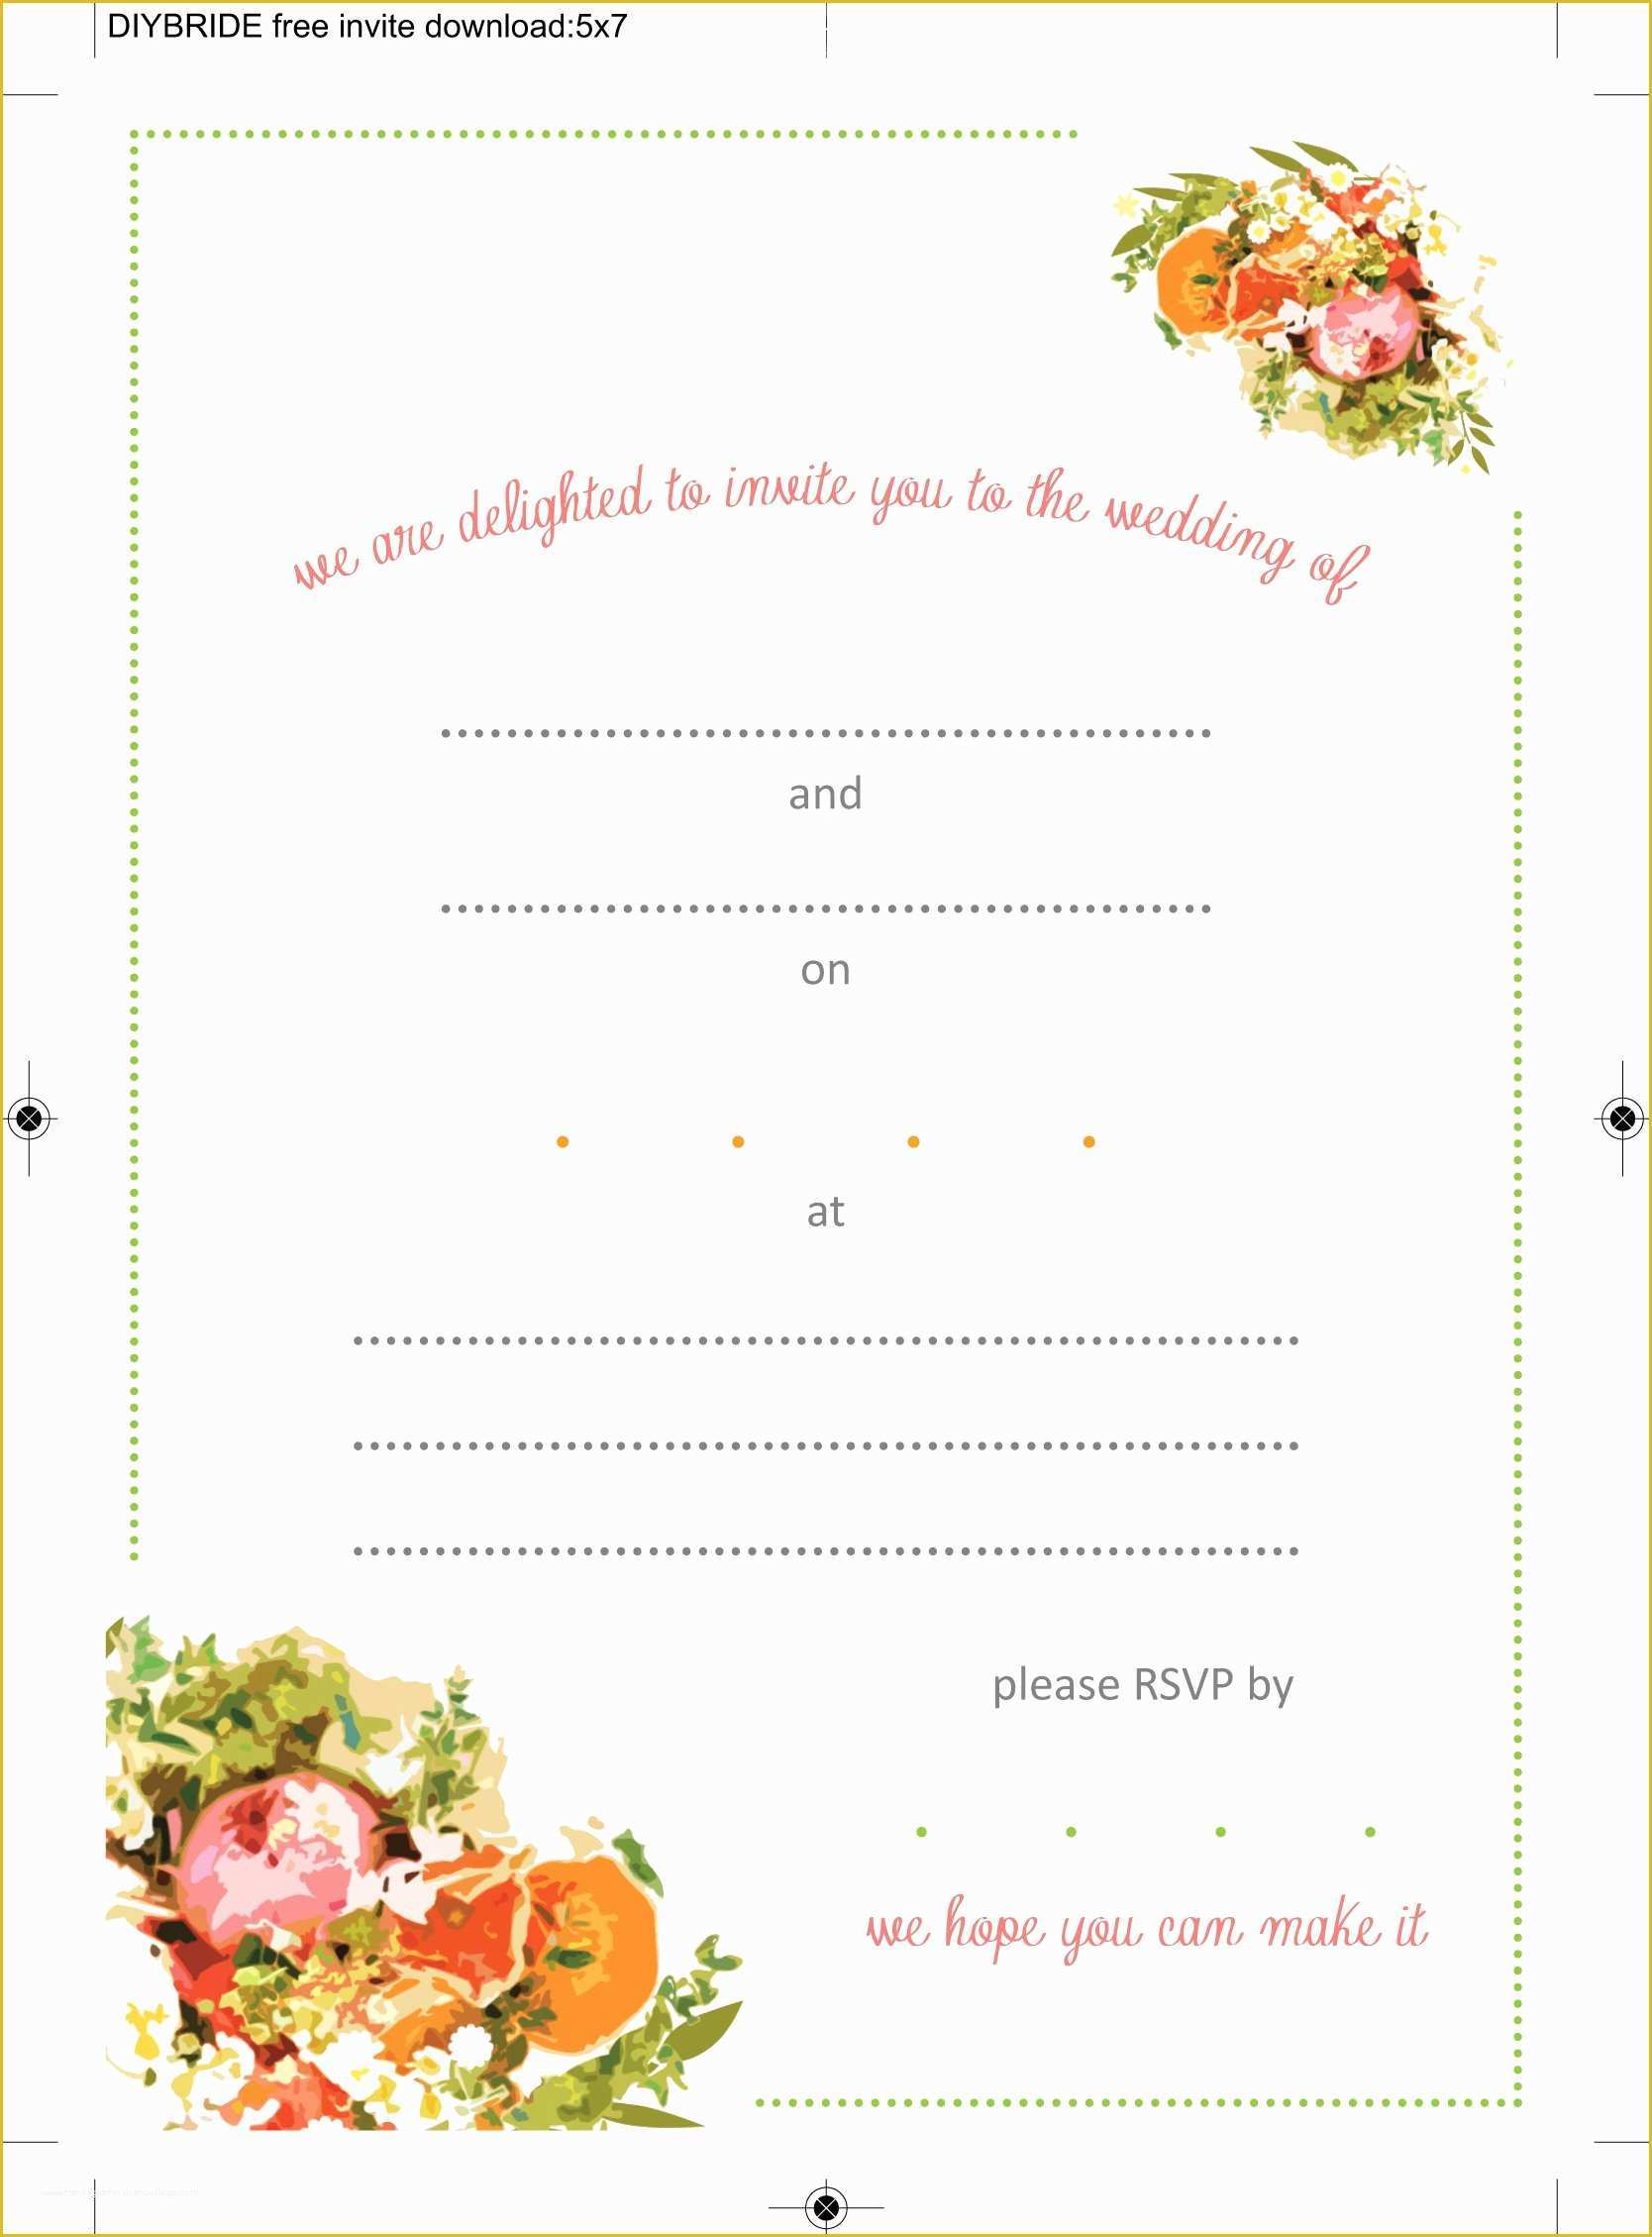 Marriage Templates Free Download Of Wedding Invitation Templates that are Cute and Easy to